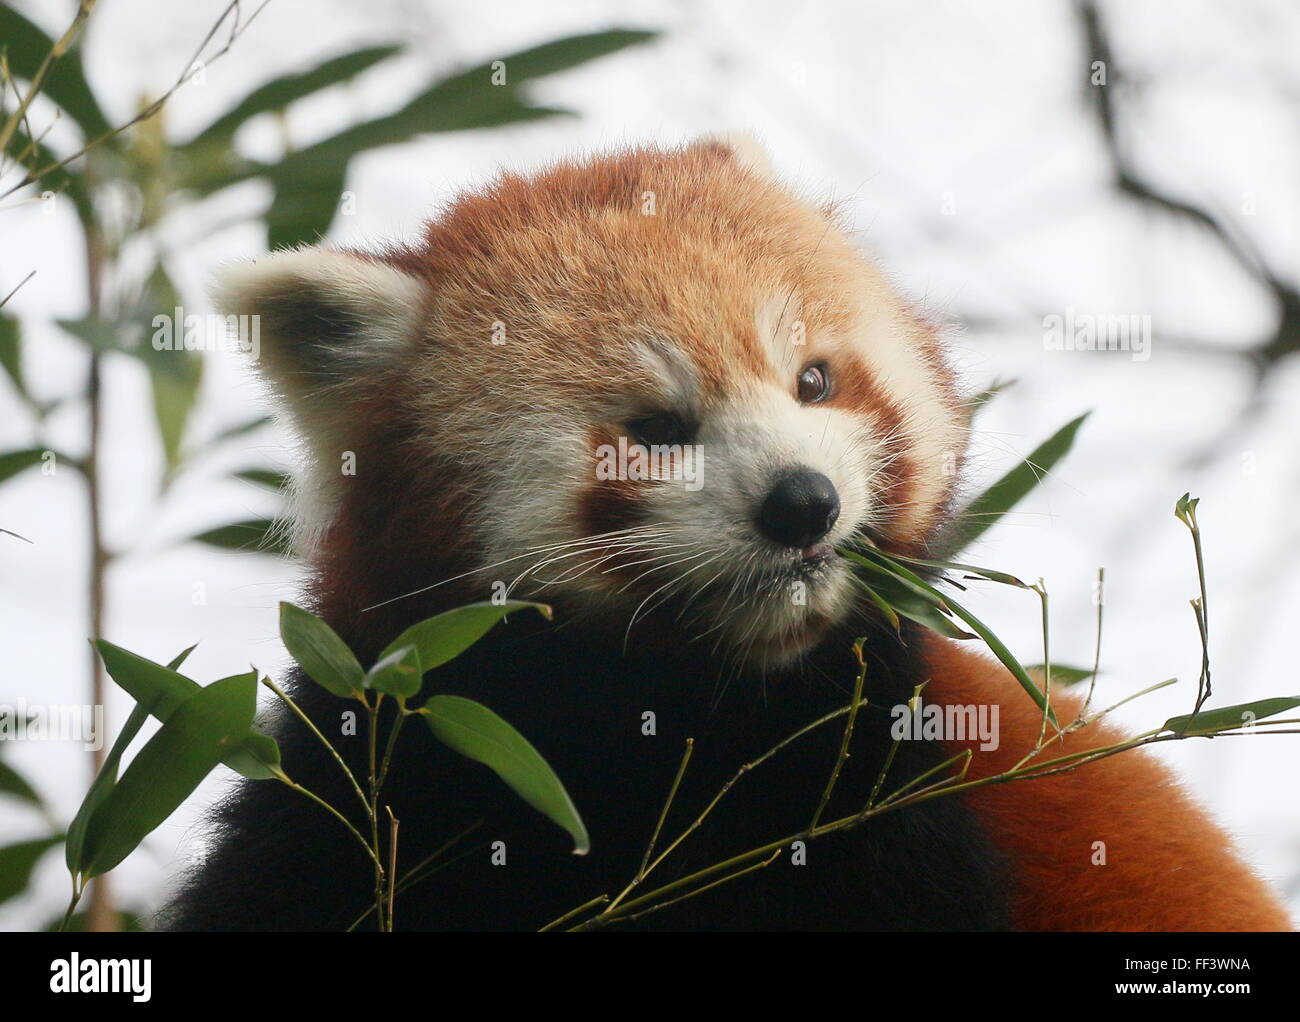 Close-up of the head of an Asian Red Panda (Ailurus fulgens) in a tree, chewing on bamboo leaves. Stock Photo